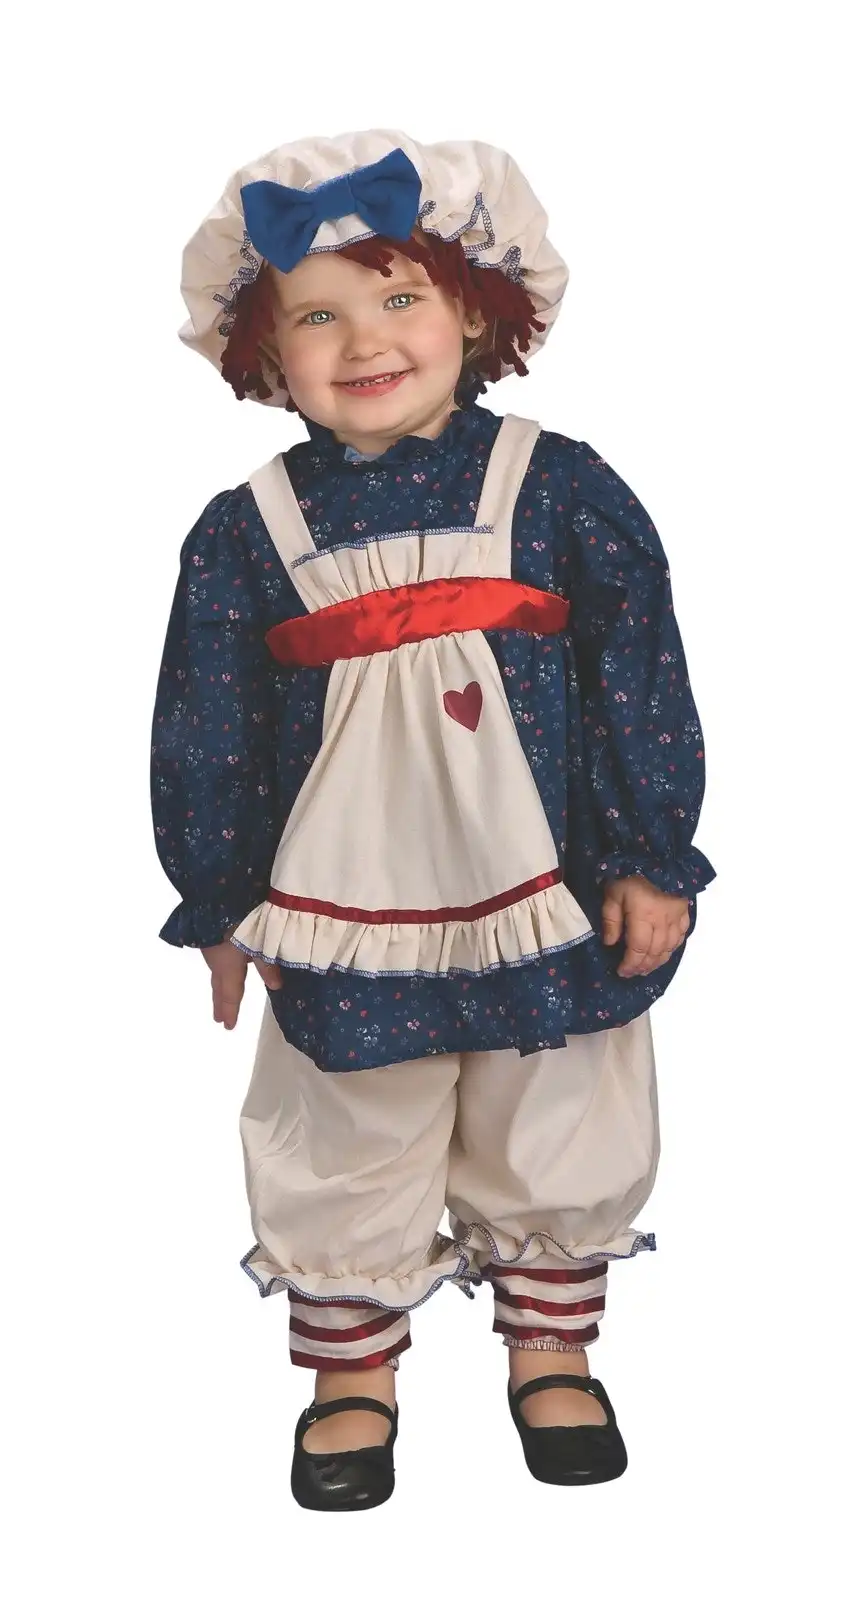 Rubies Ragamuffin Dolly Dress Up Rag Doll Halloween Party Kids Costume Size S